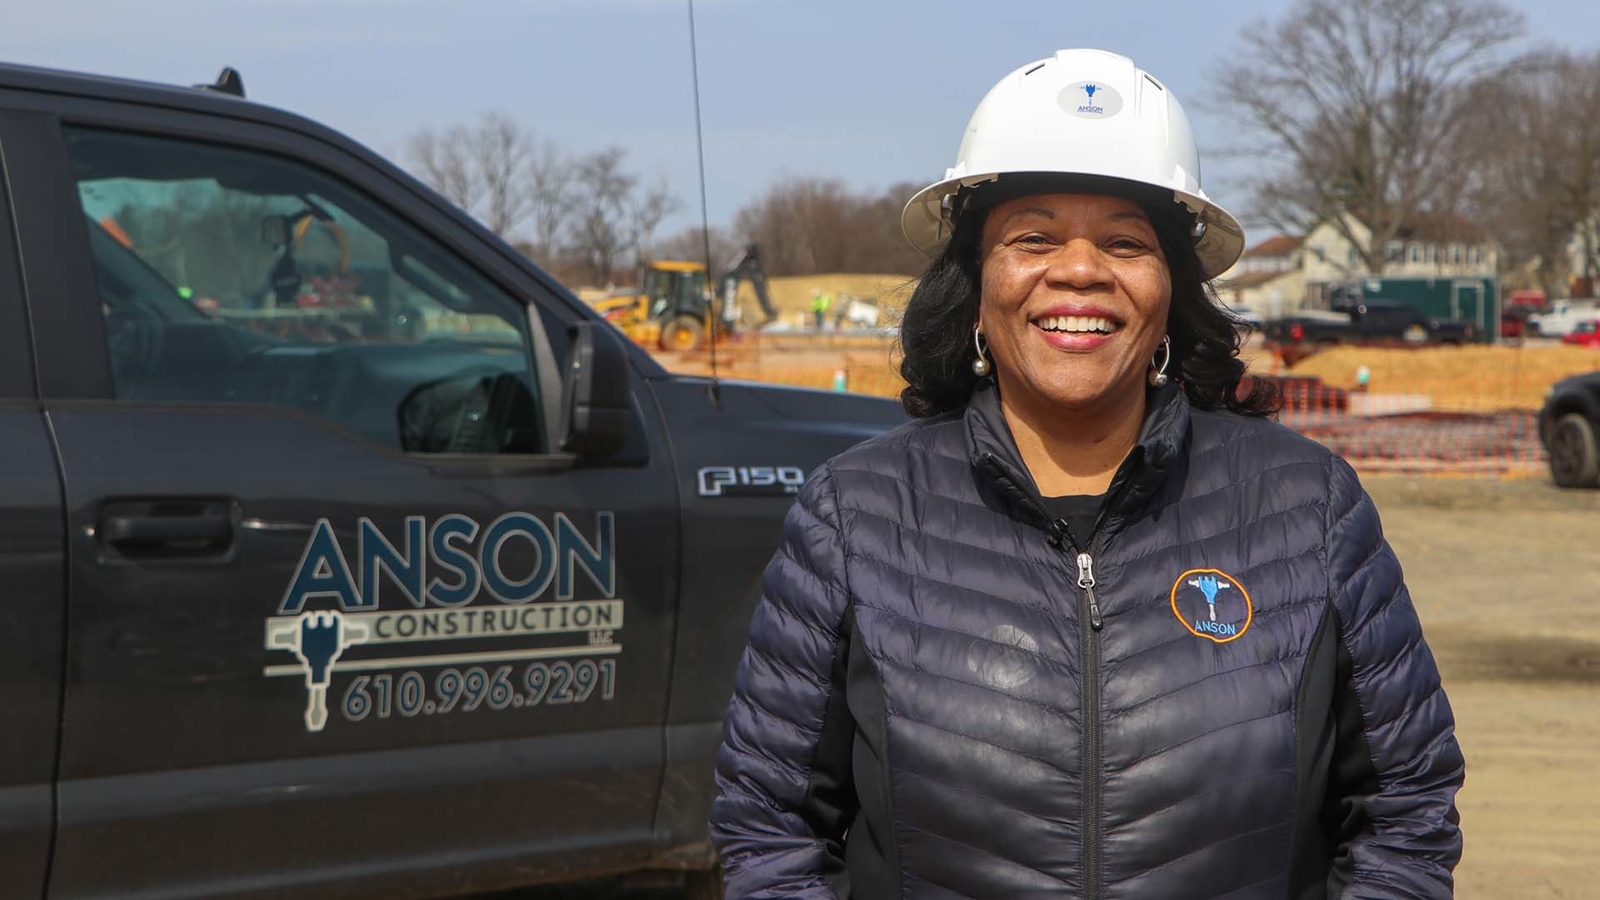  Pa. woman comes out of retirement to build job opportunities 